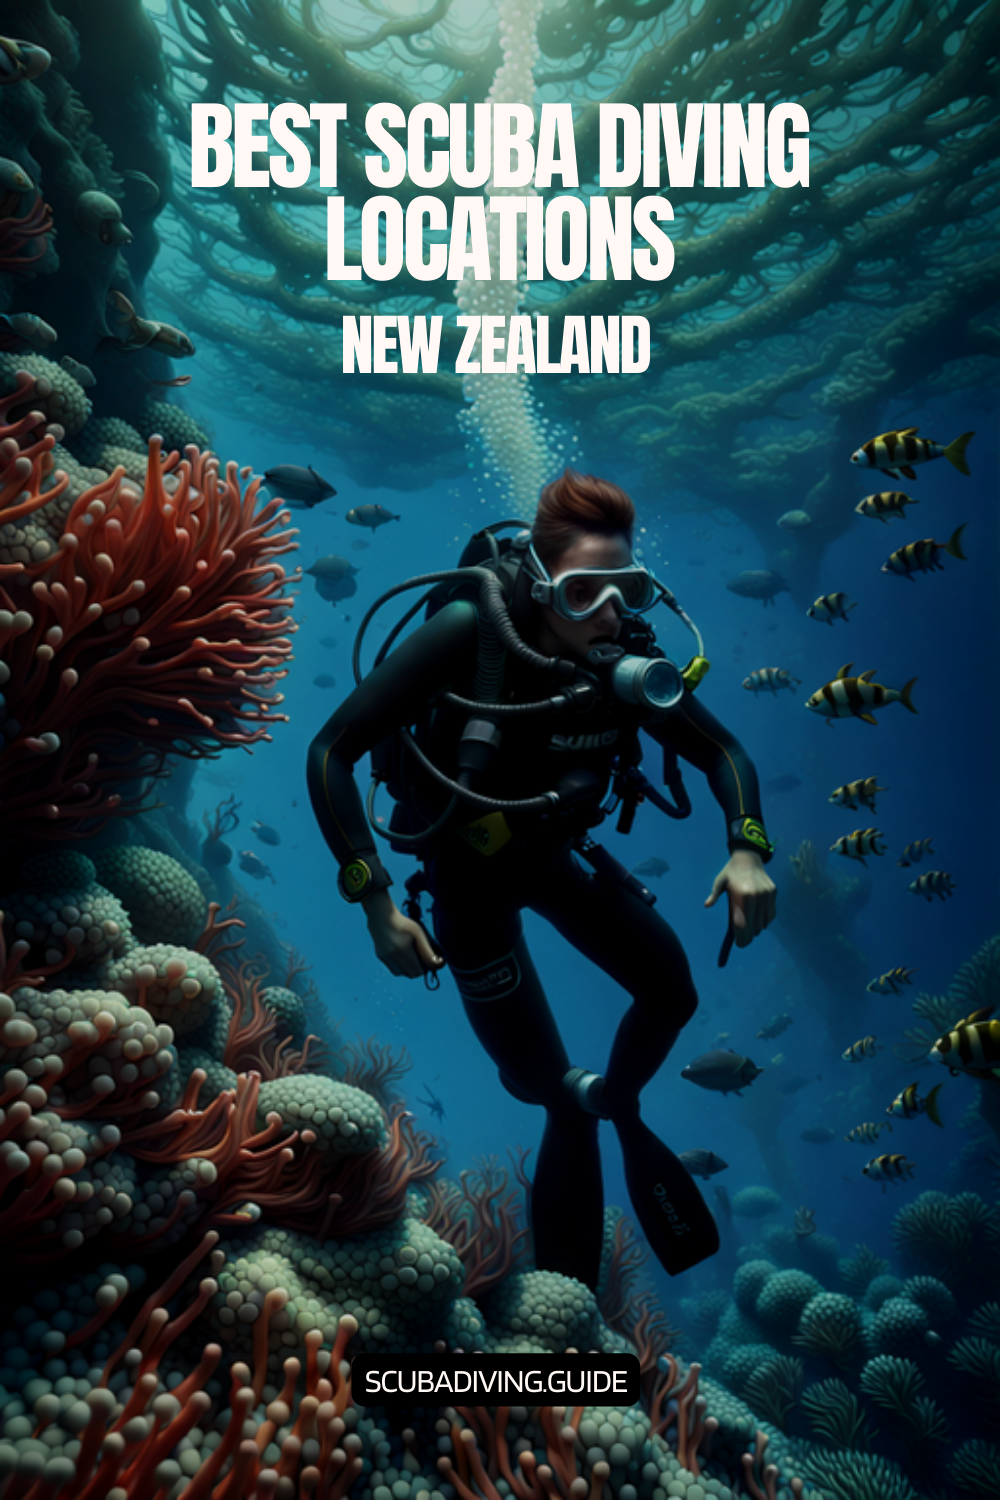 Scuba Diving Locations in New Zealand